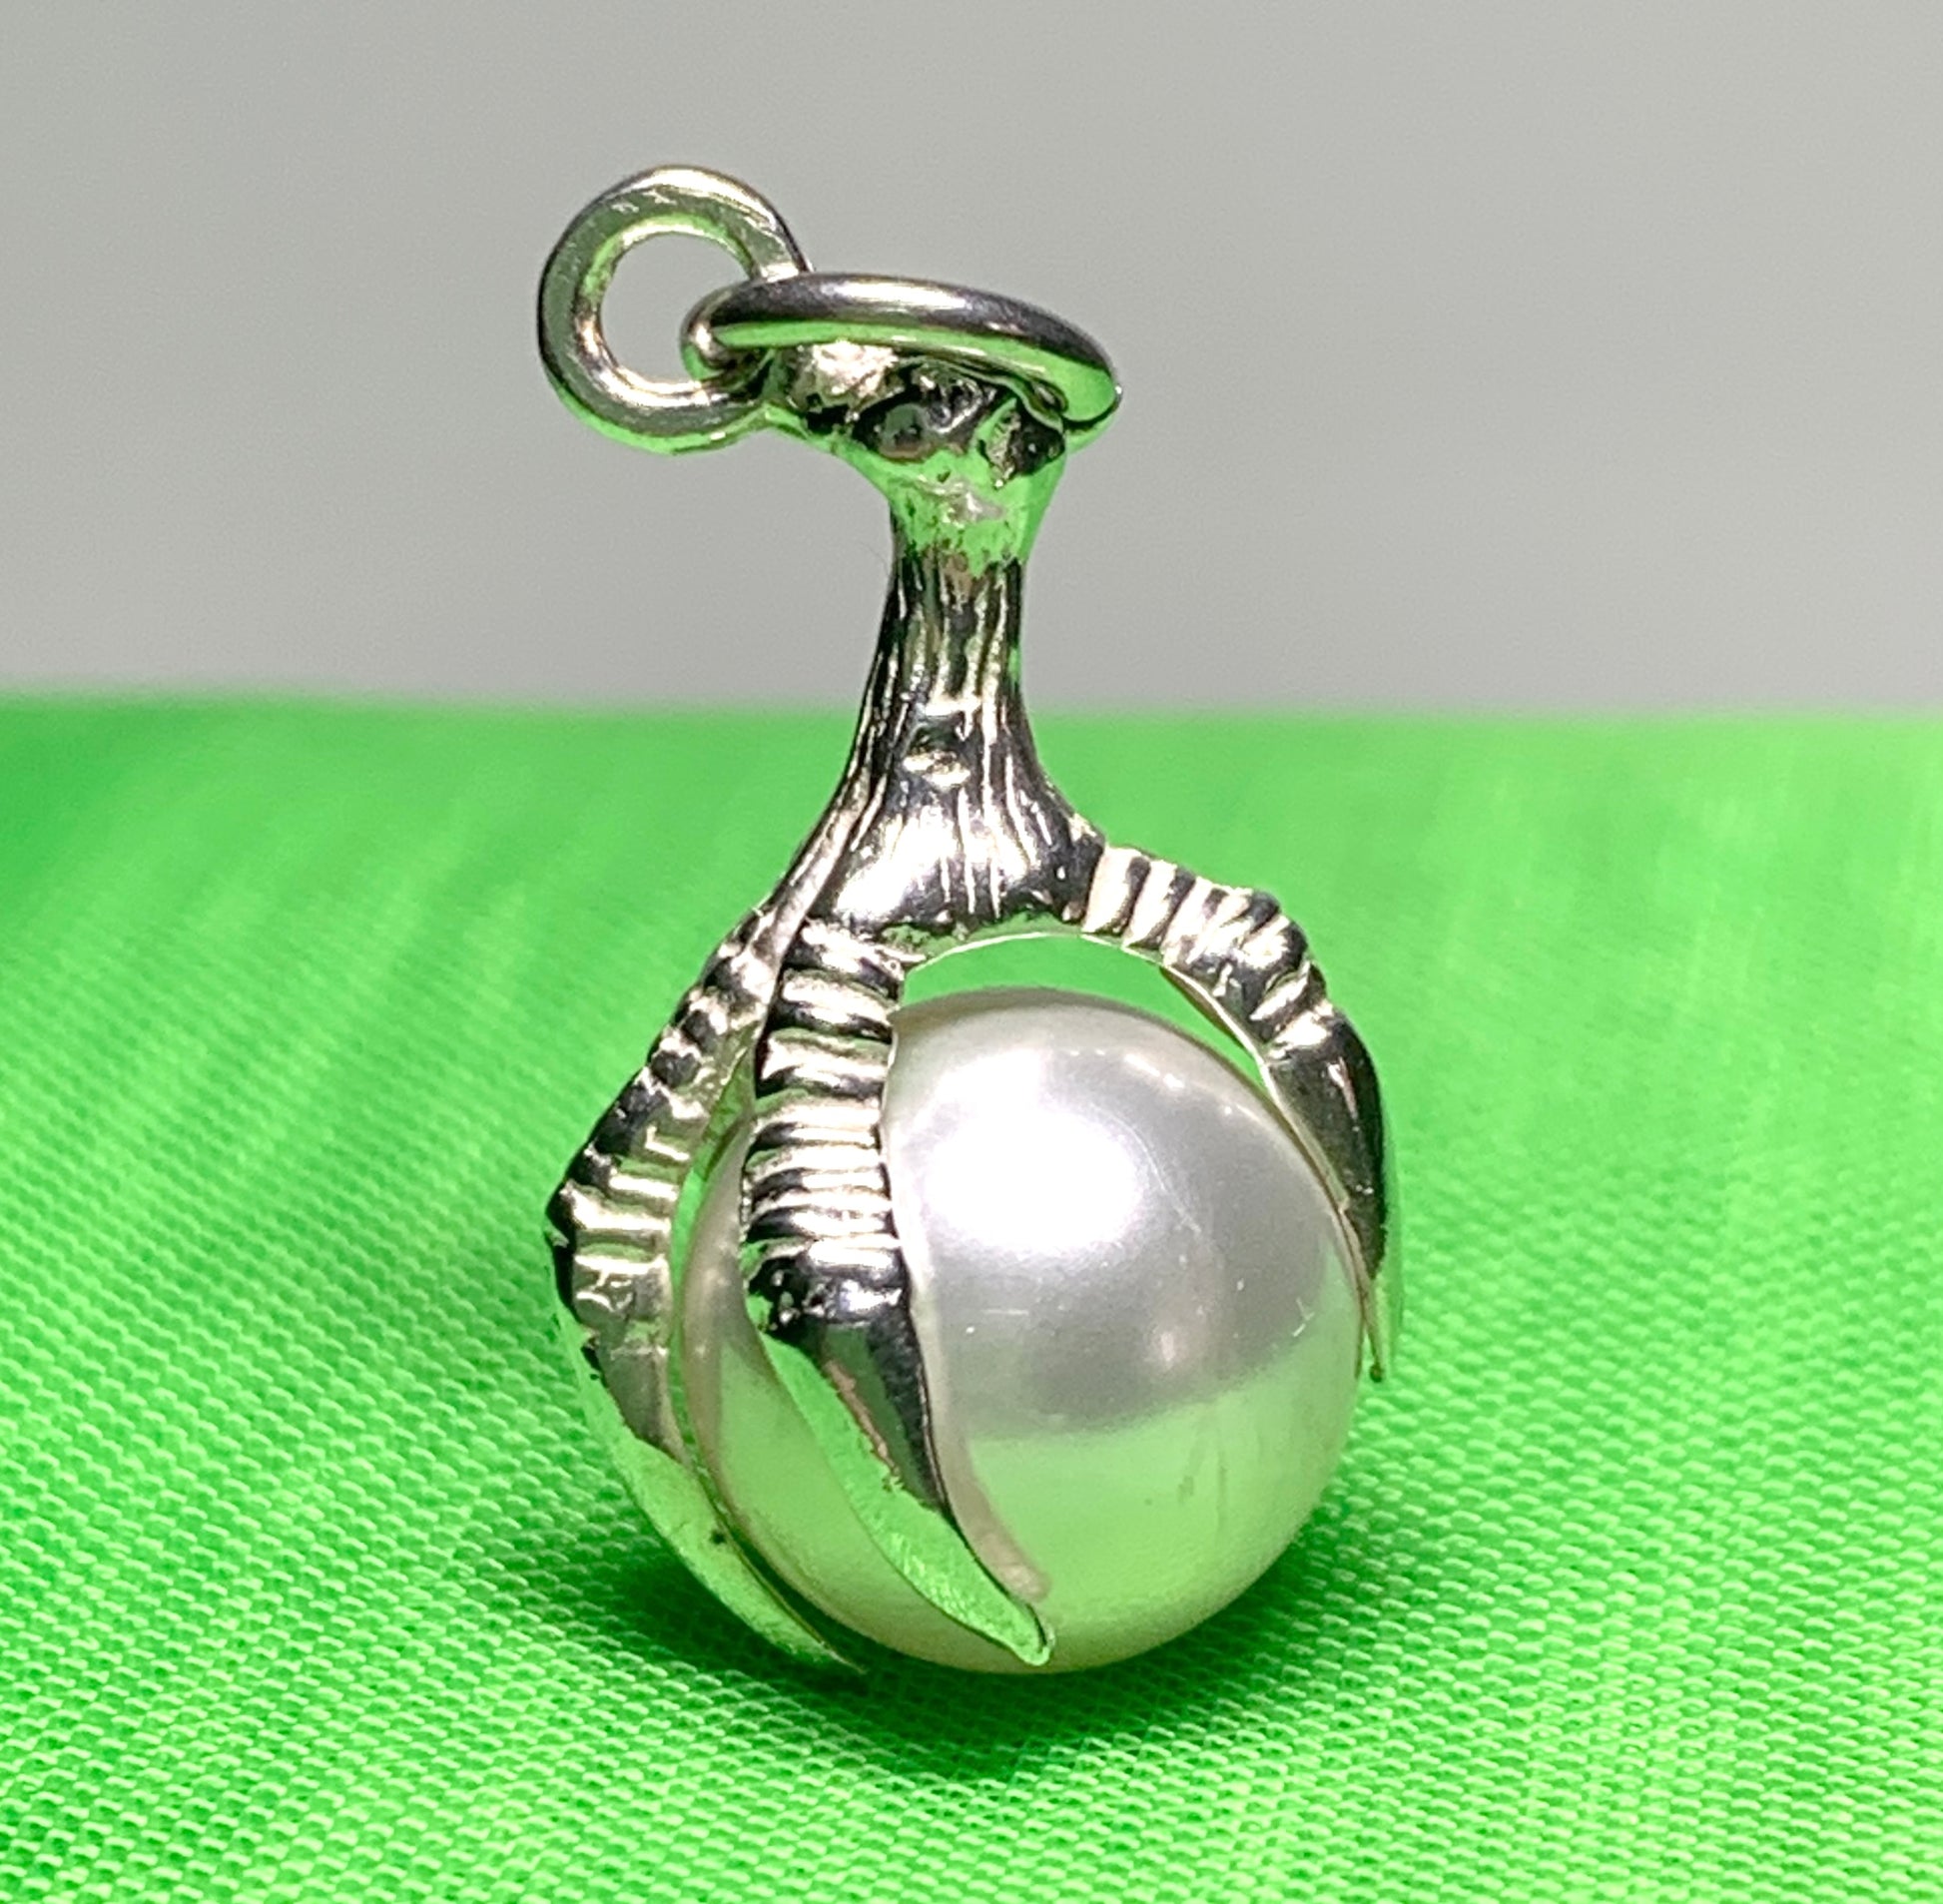 Bird of Prey talon hooked claw real freshwater pearl men’s necklace silver